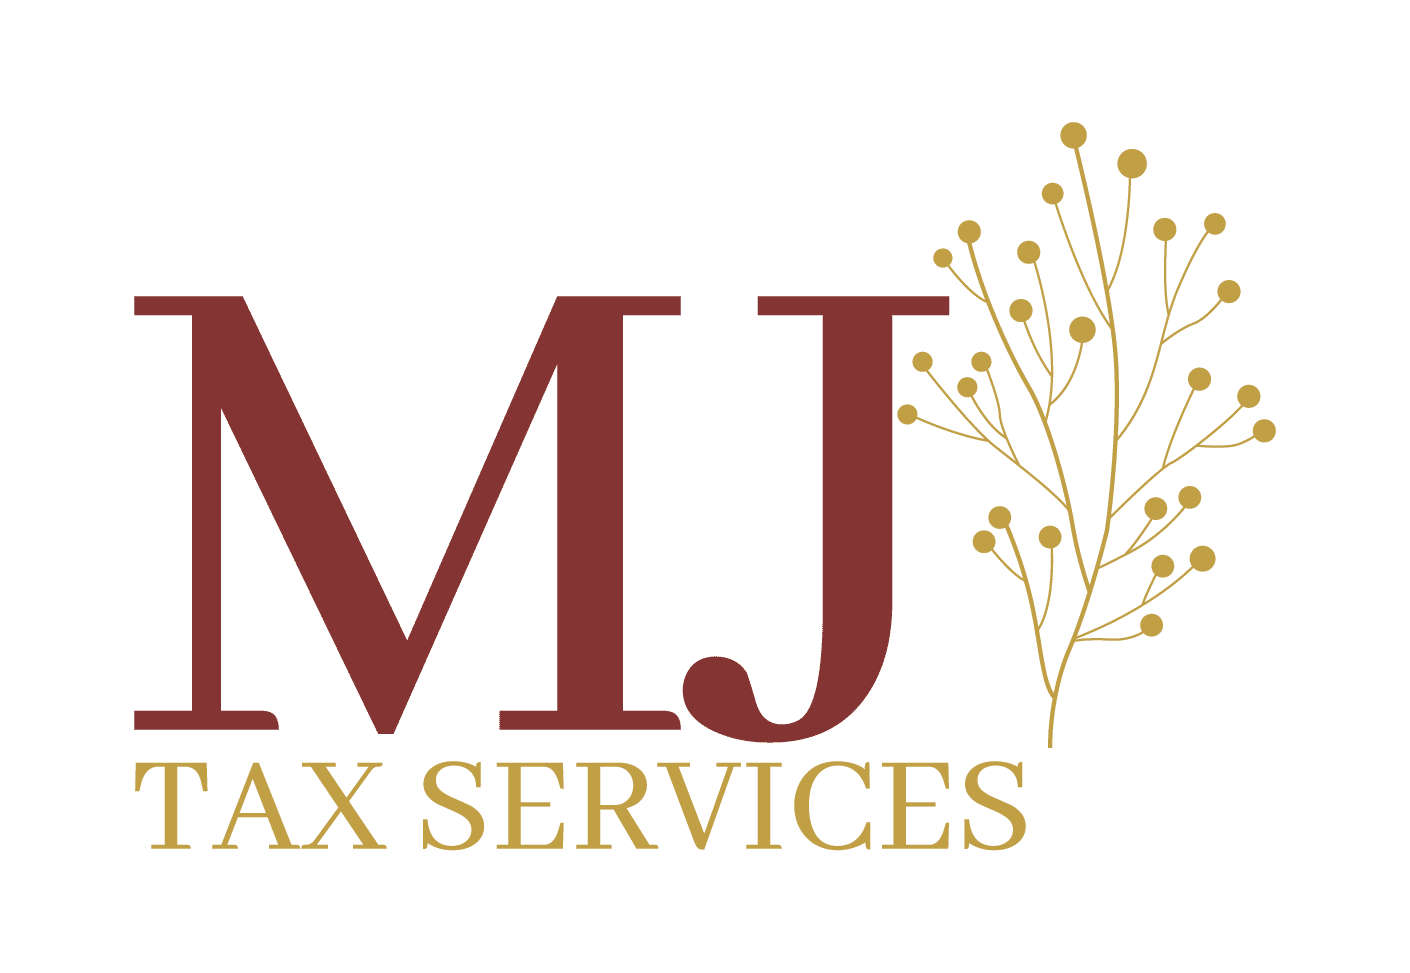 MJ Tax Services is a full-service accounting and tax firm located in Boca Raton, FL.